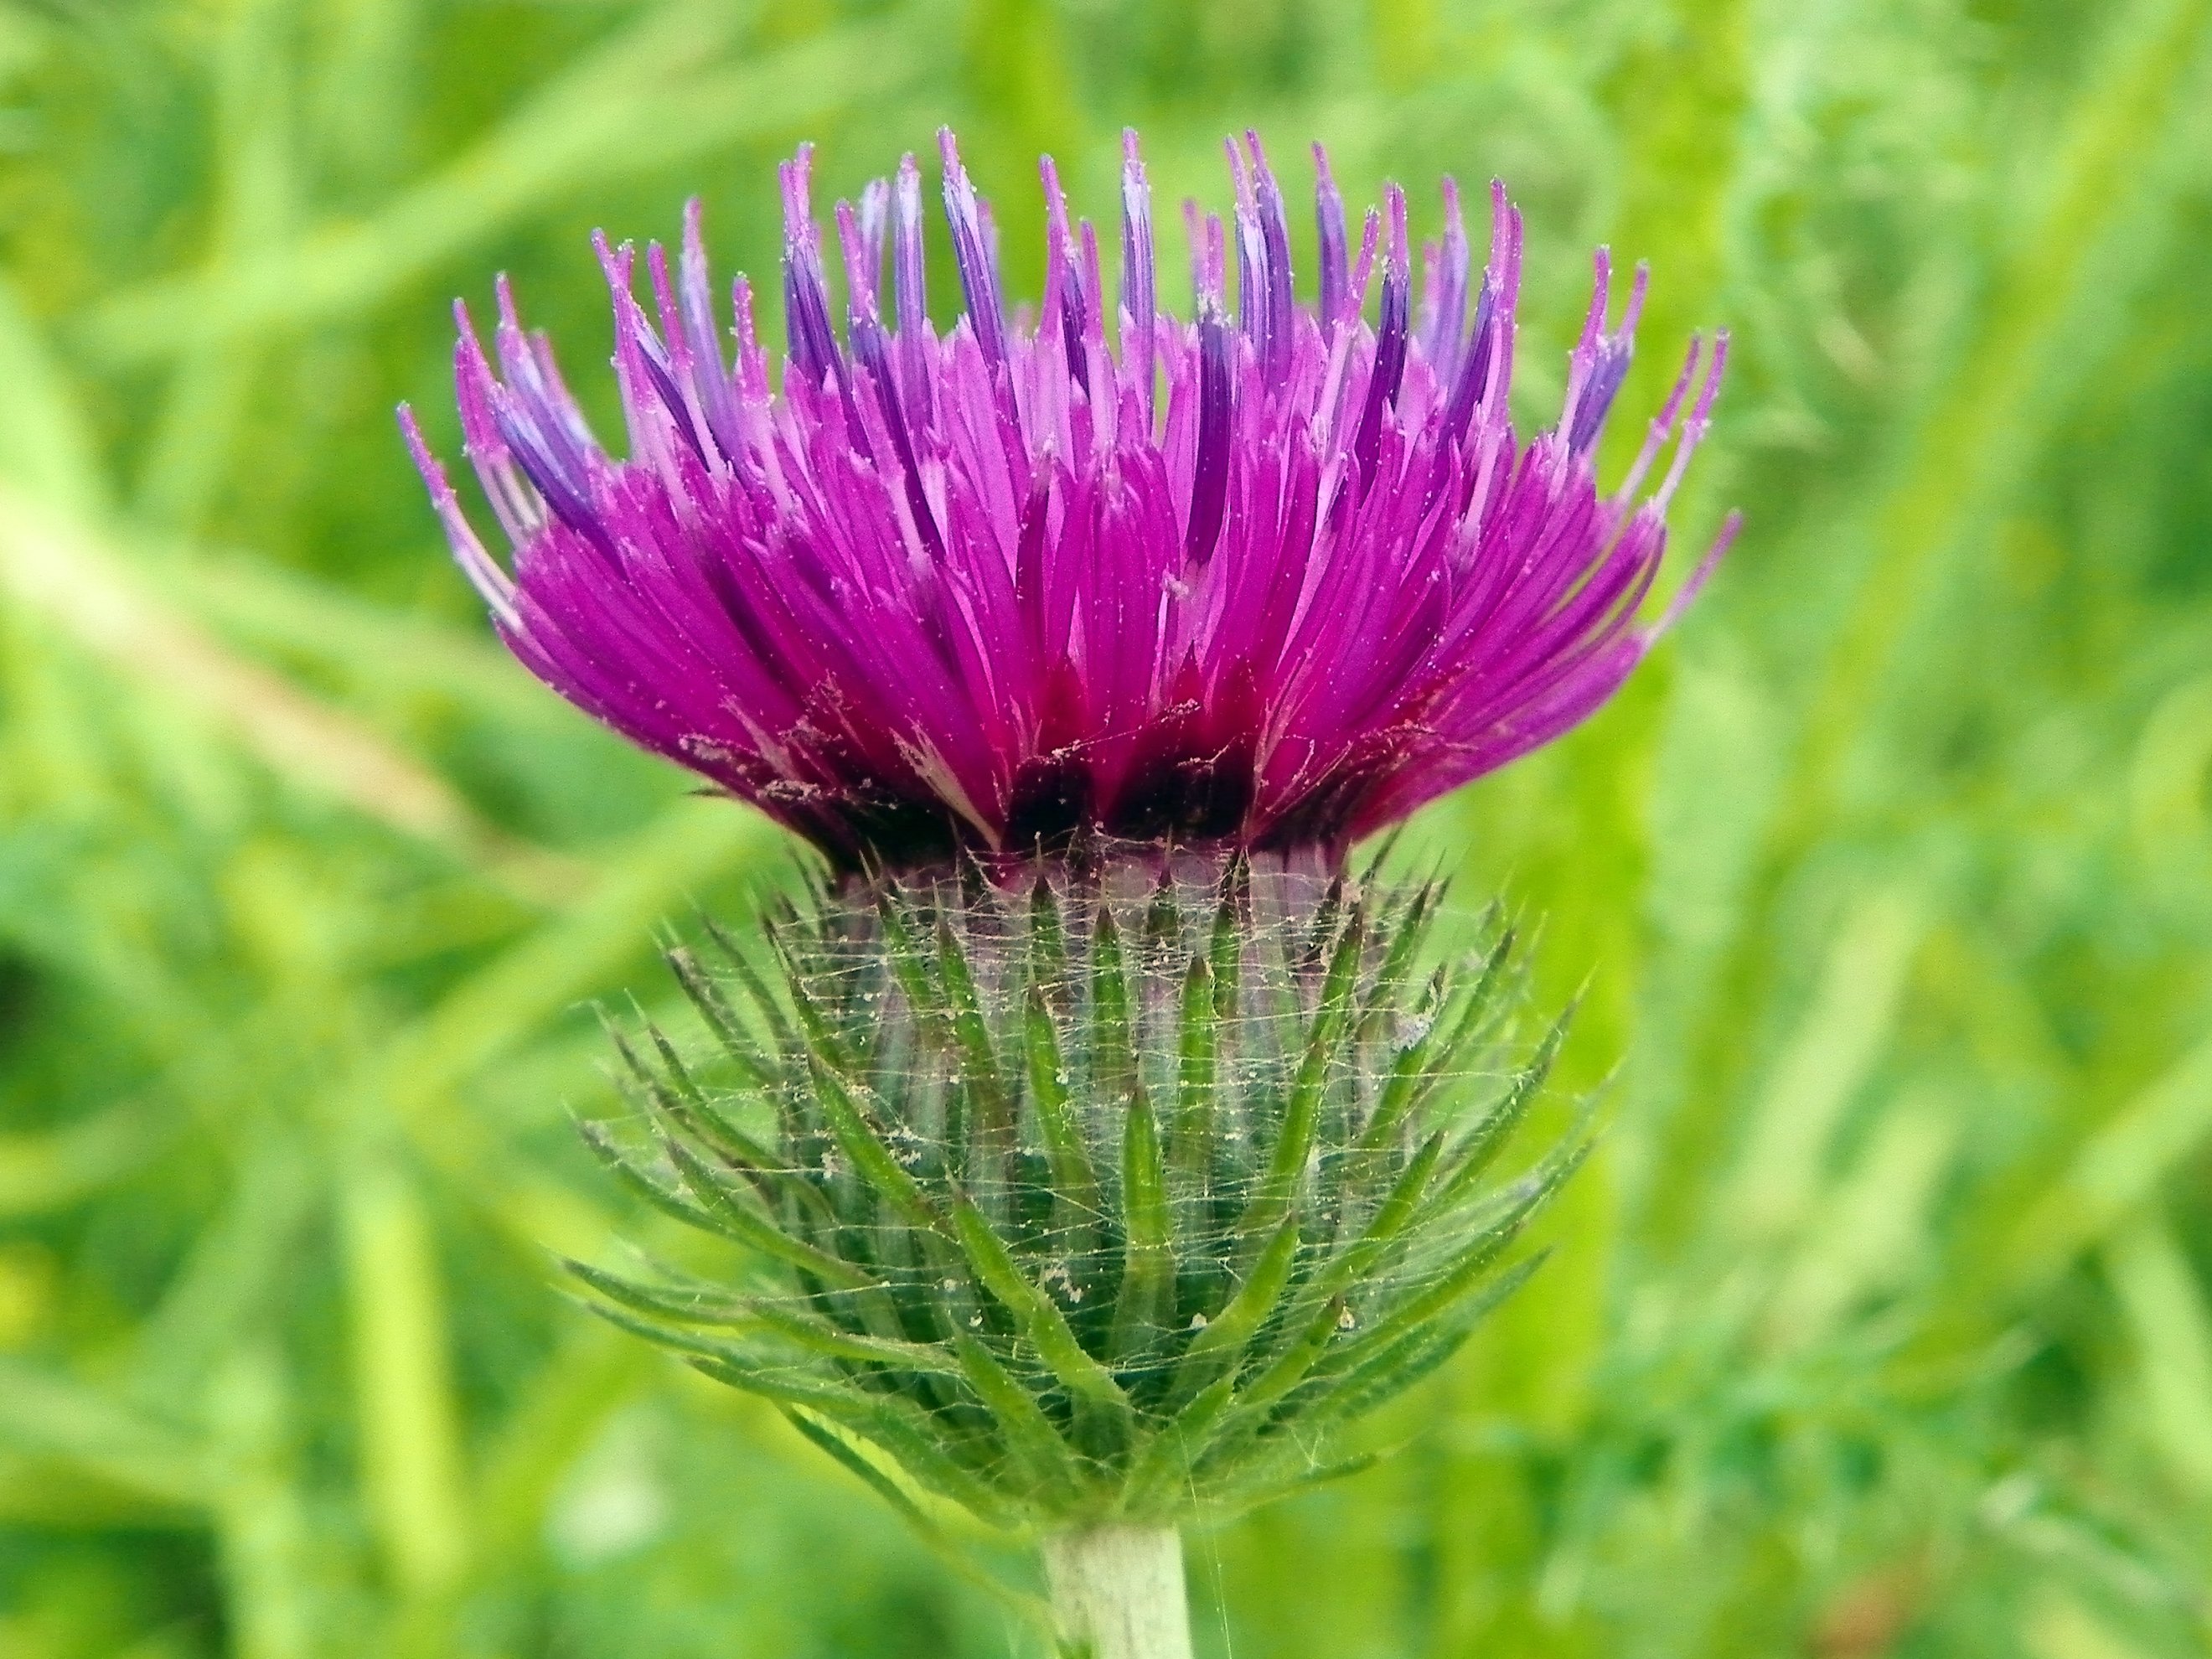 File:Welted Thistle (Carduus crispus).jpg - Wikimedia Commons